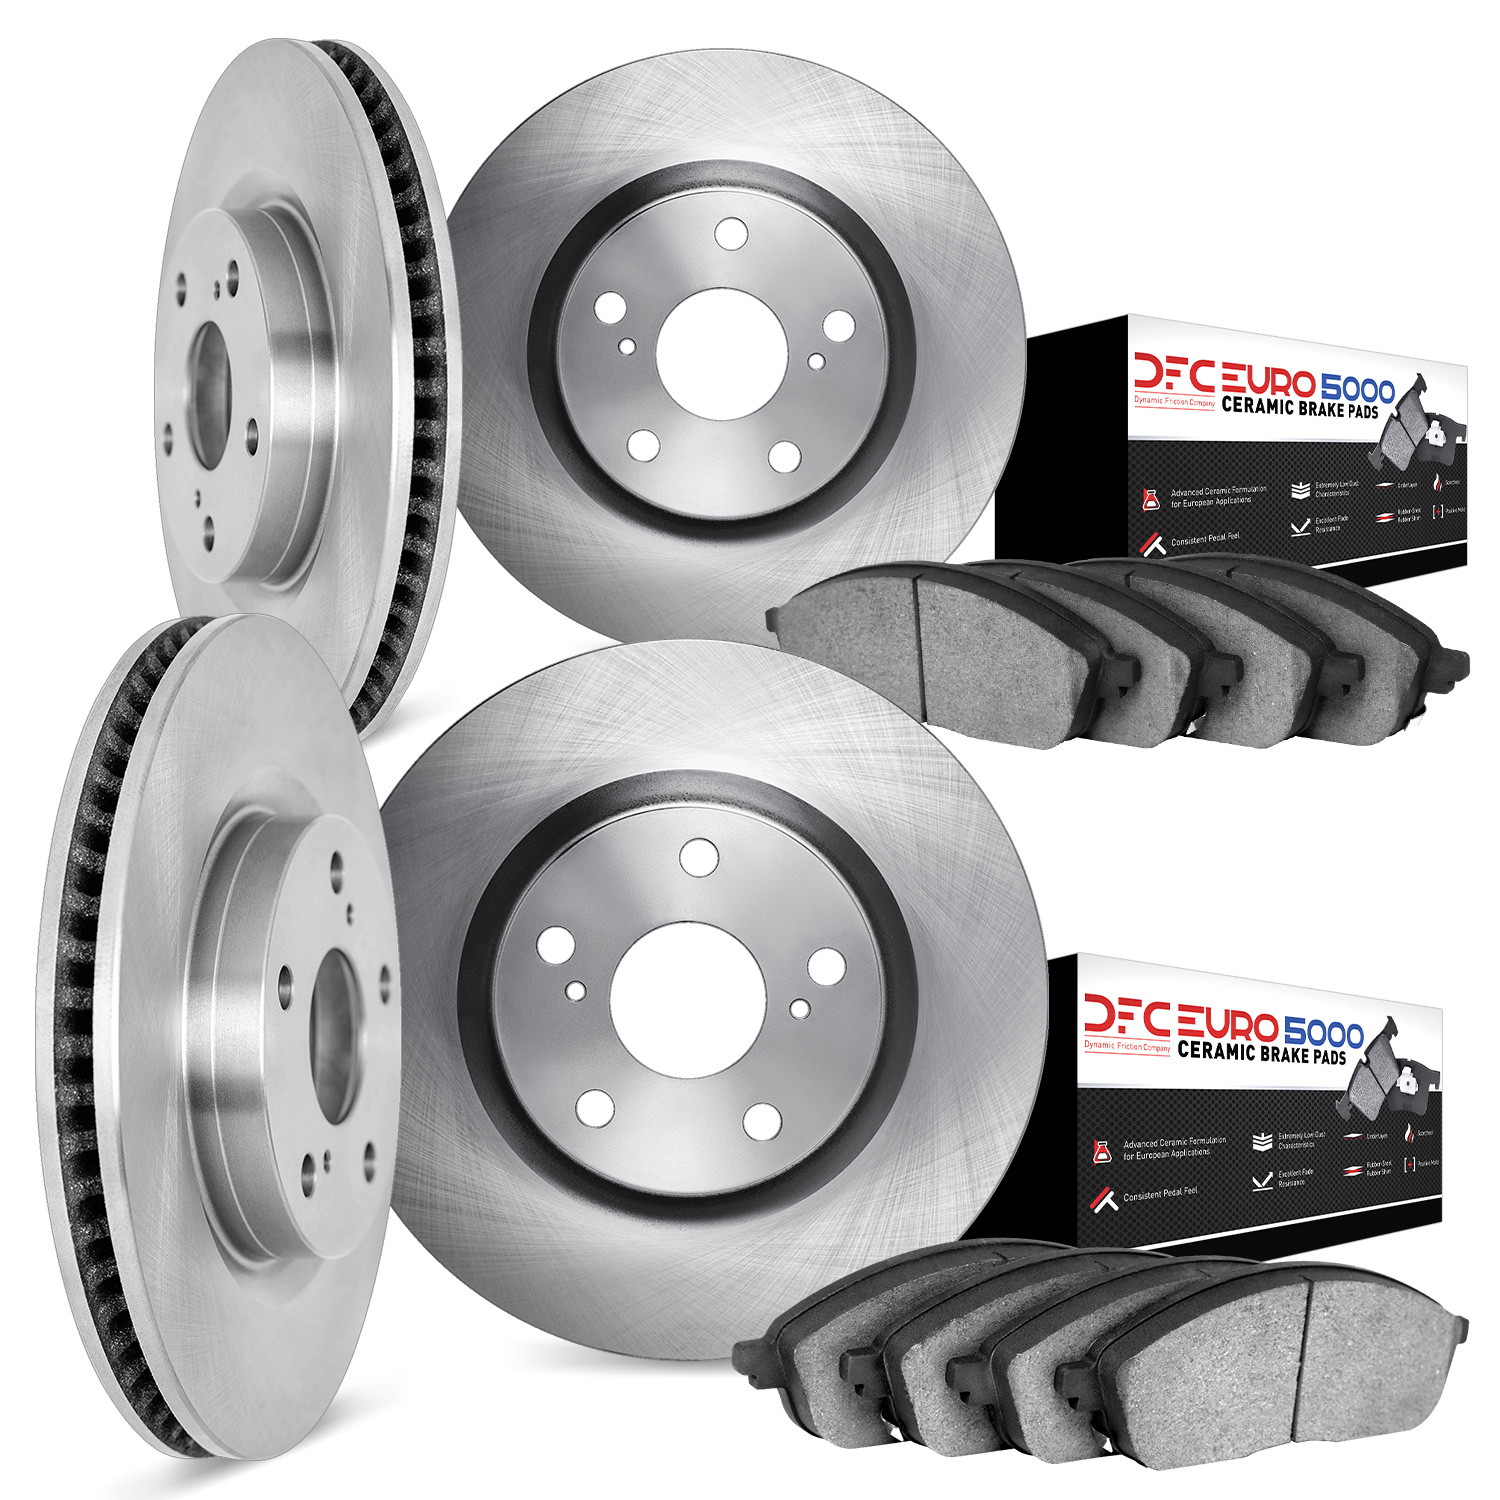 6604-63022 Brake Rotors w/5000 Euro Ceramic Brake Pads, 2003-2006 Mercedes-Benz, Position: Front and Rear